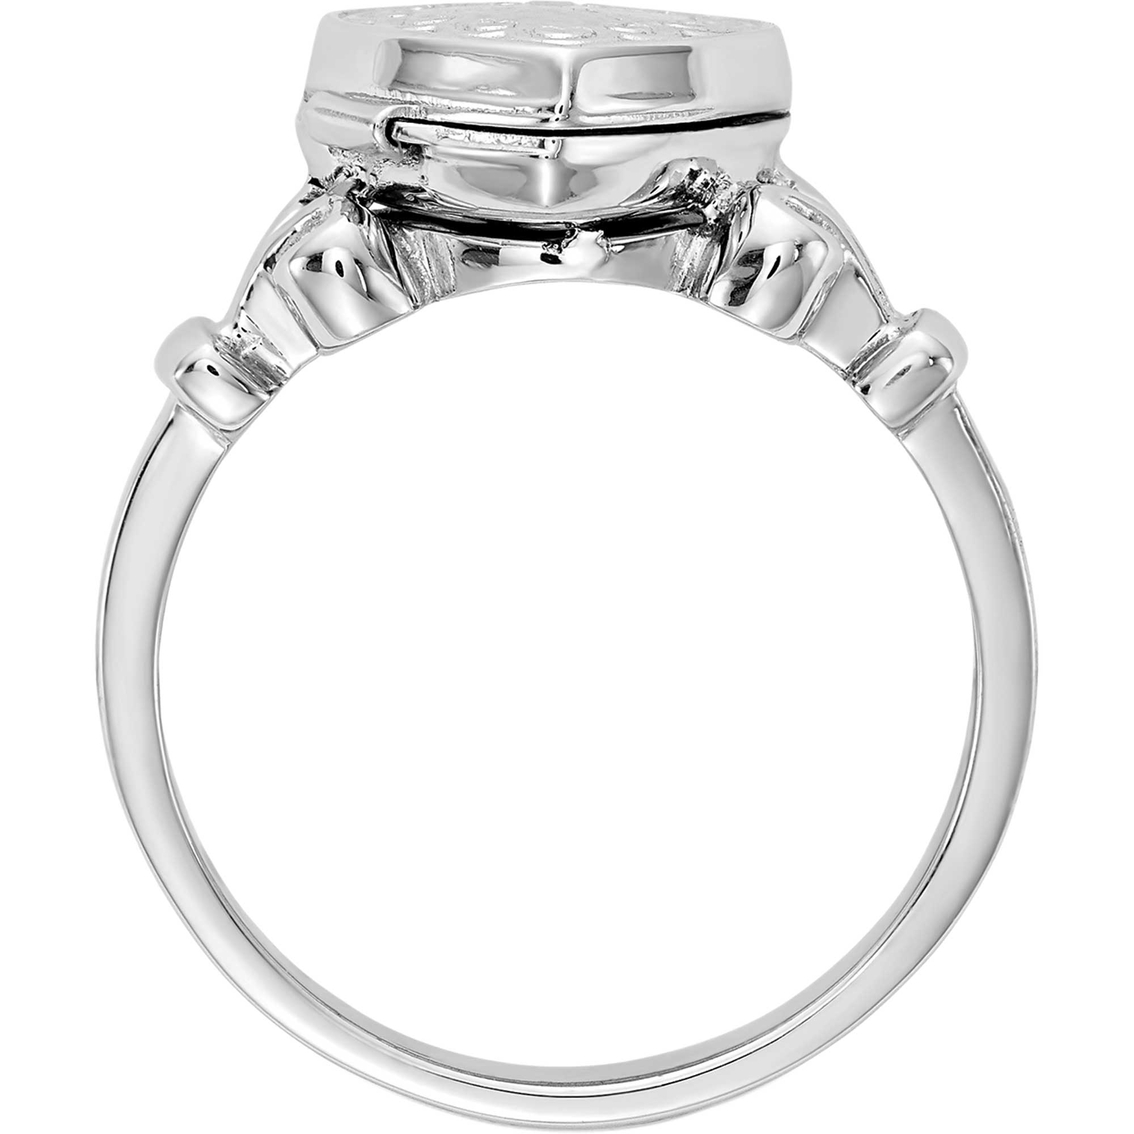 Rhodium Over Sterling Silver 10mm Locket Ring - Image 4 of 4